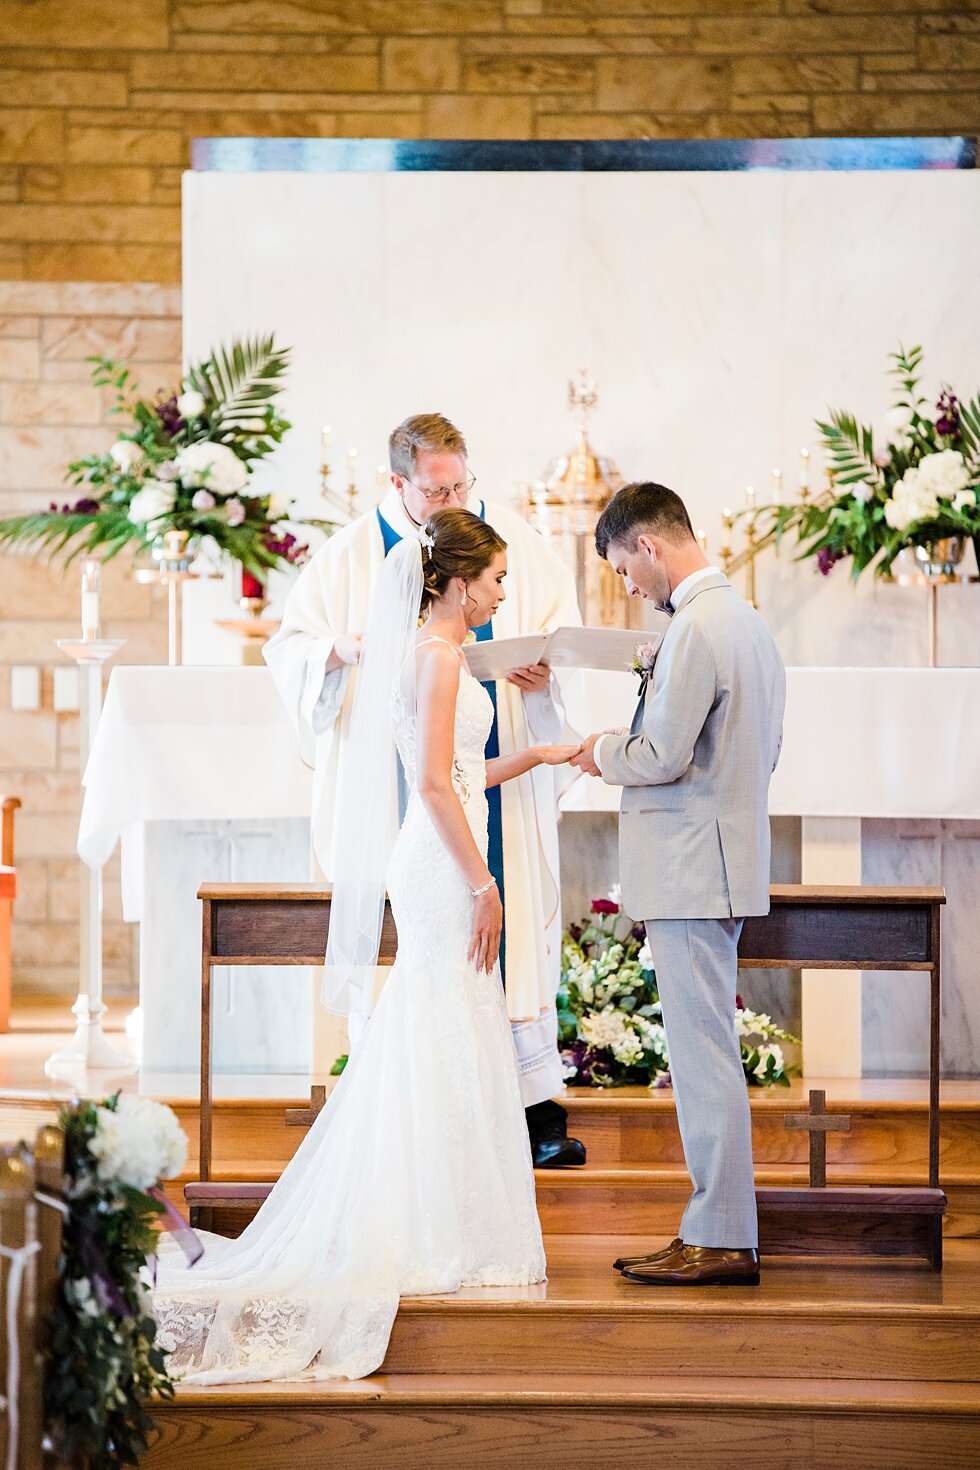  Bride and groom exchanging rings during their wedding ceremony. wedding ceremony details stunning photography married midwest louisville kentucky #weddingphoto #love #justmarried #midwestphotographer #kywedding #louisville #kentuckywedding #auburnky